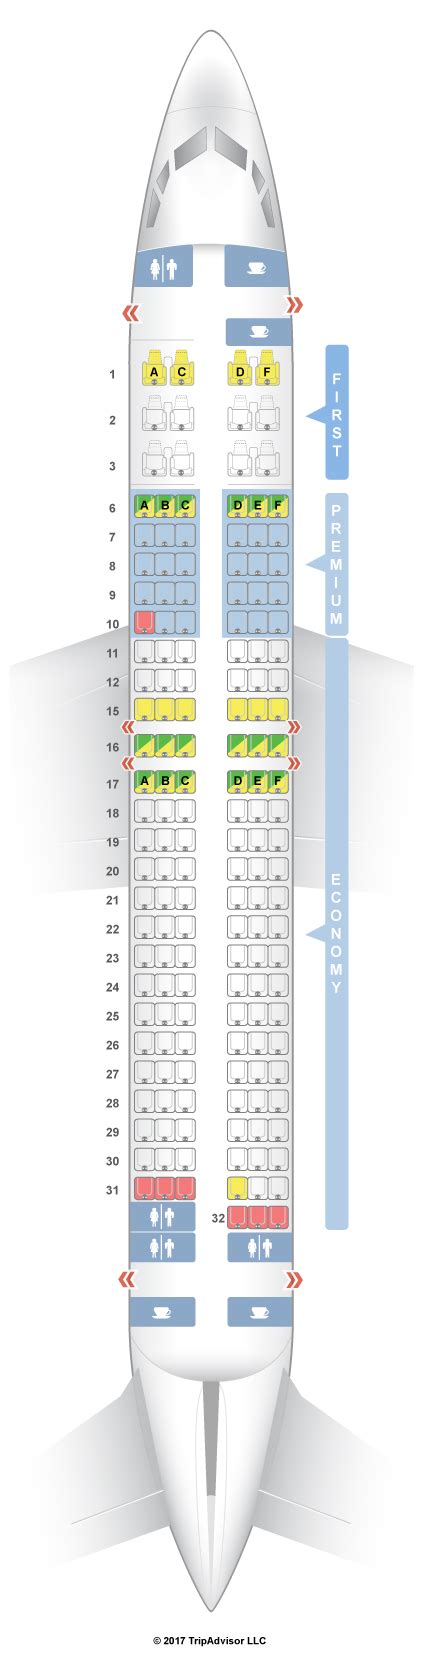 Alaska Airlines Aircraft Seatmaps Airline Seating Maps And Layouts Hot Sex Picture